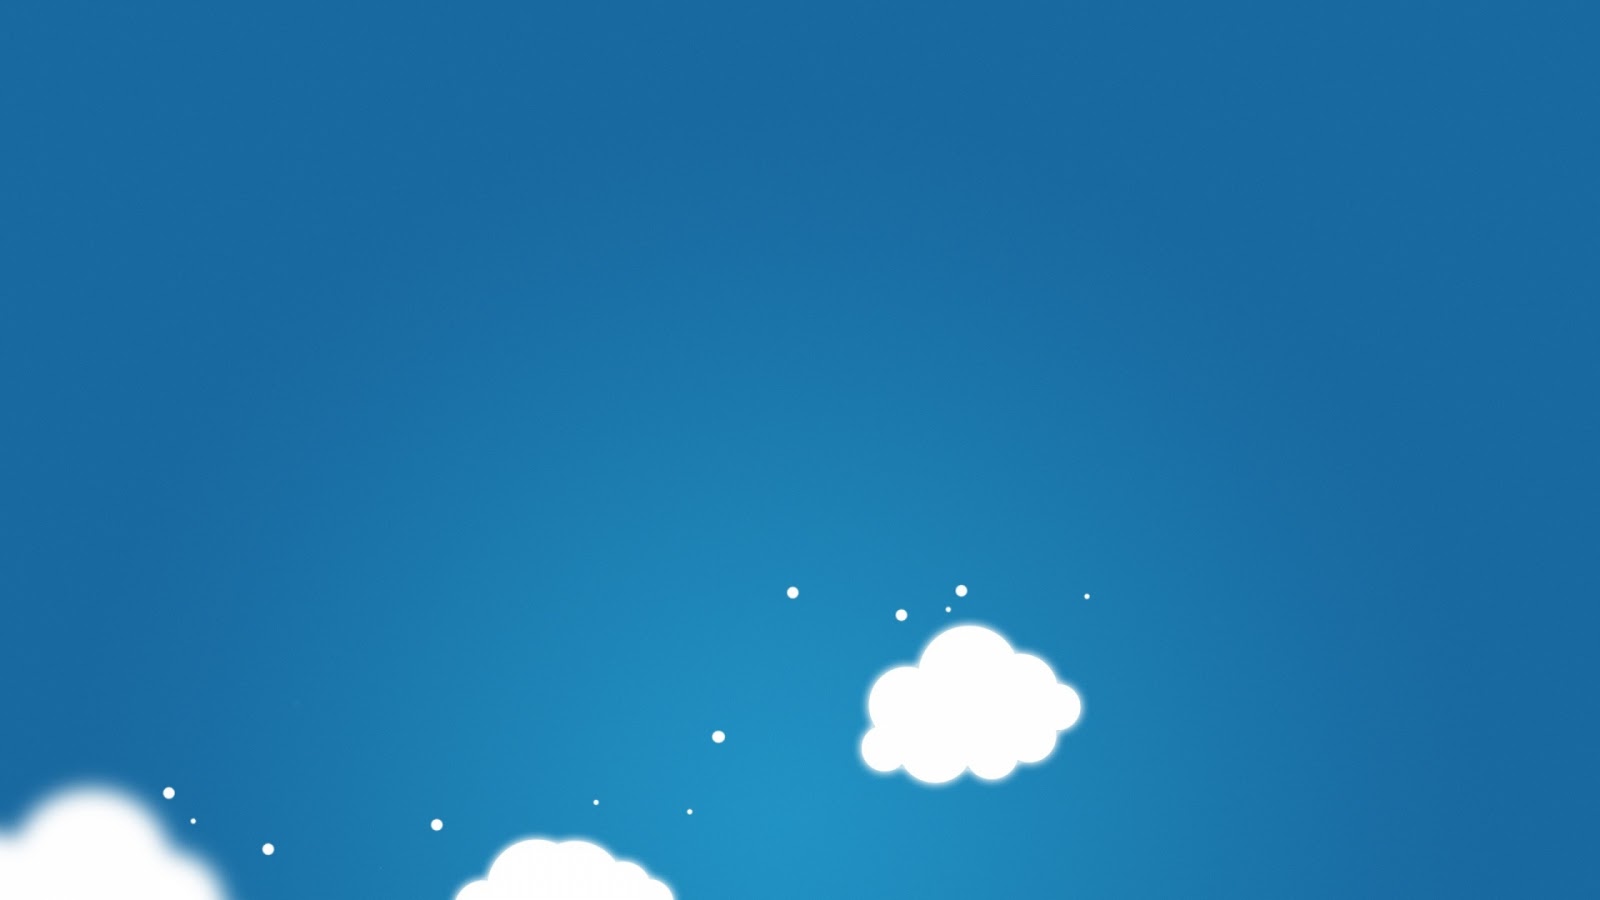 HD Wallpapers Minimal Cartoon Clouds Blue Background 1600x900